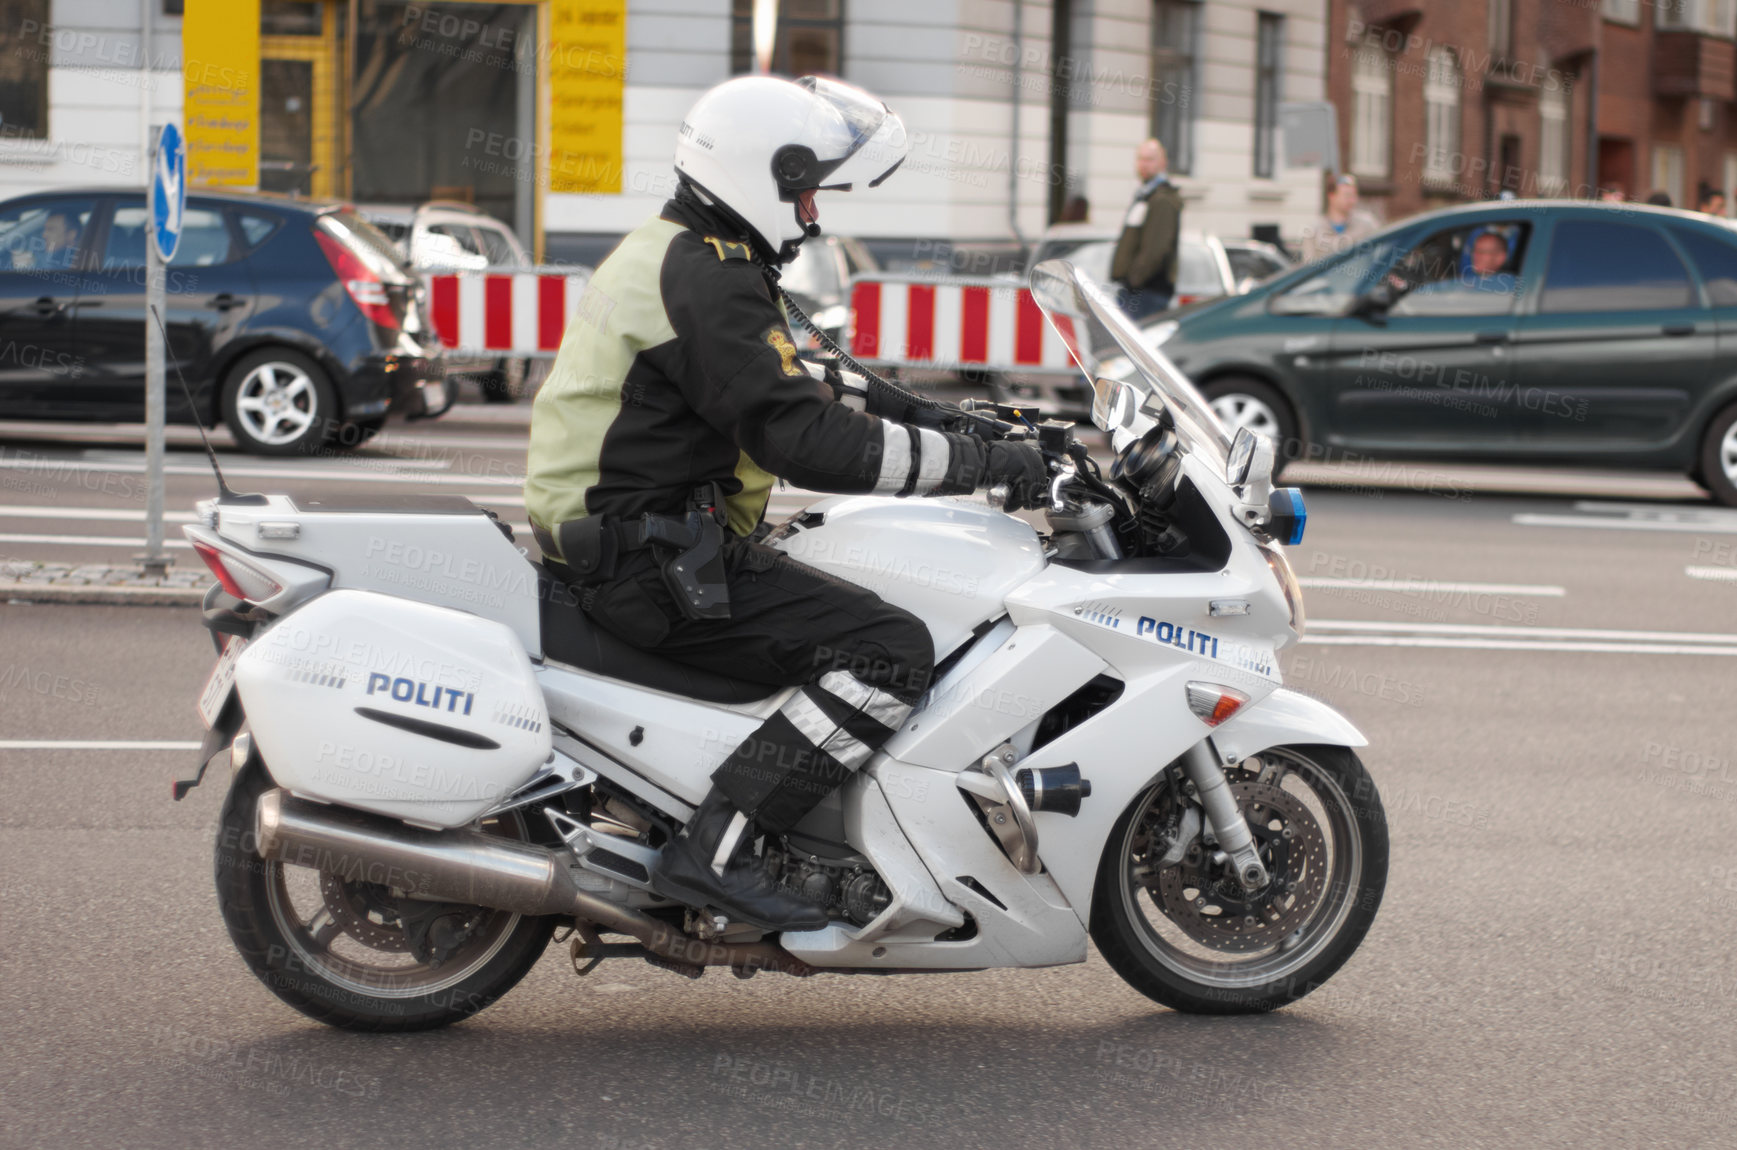 Buy stock photo Police, motorbike and road safety officer working for protection and peace in an urban neighborhood in Denmark. Security, law and legal professional or policeman on a motorcycle ready for service